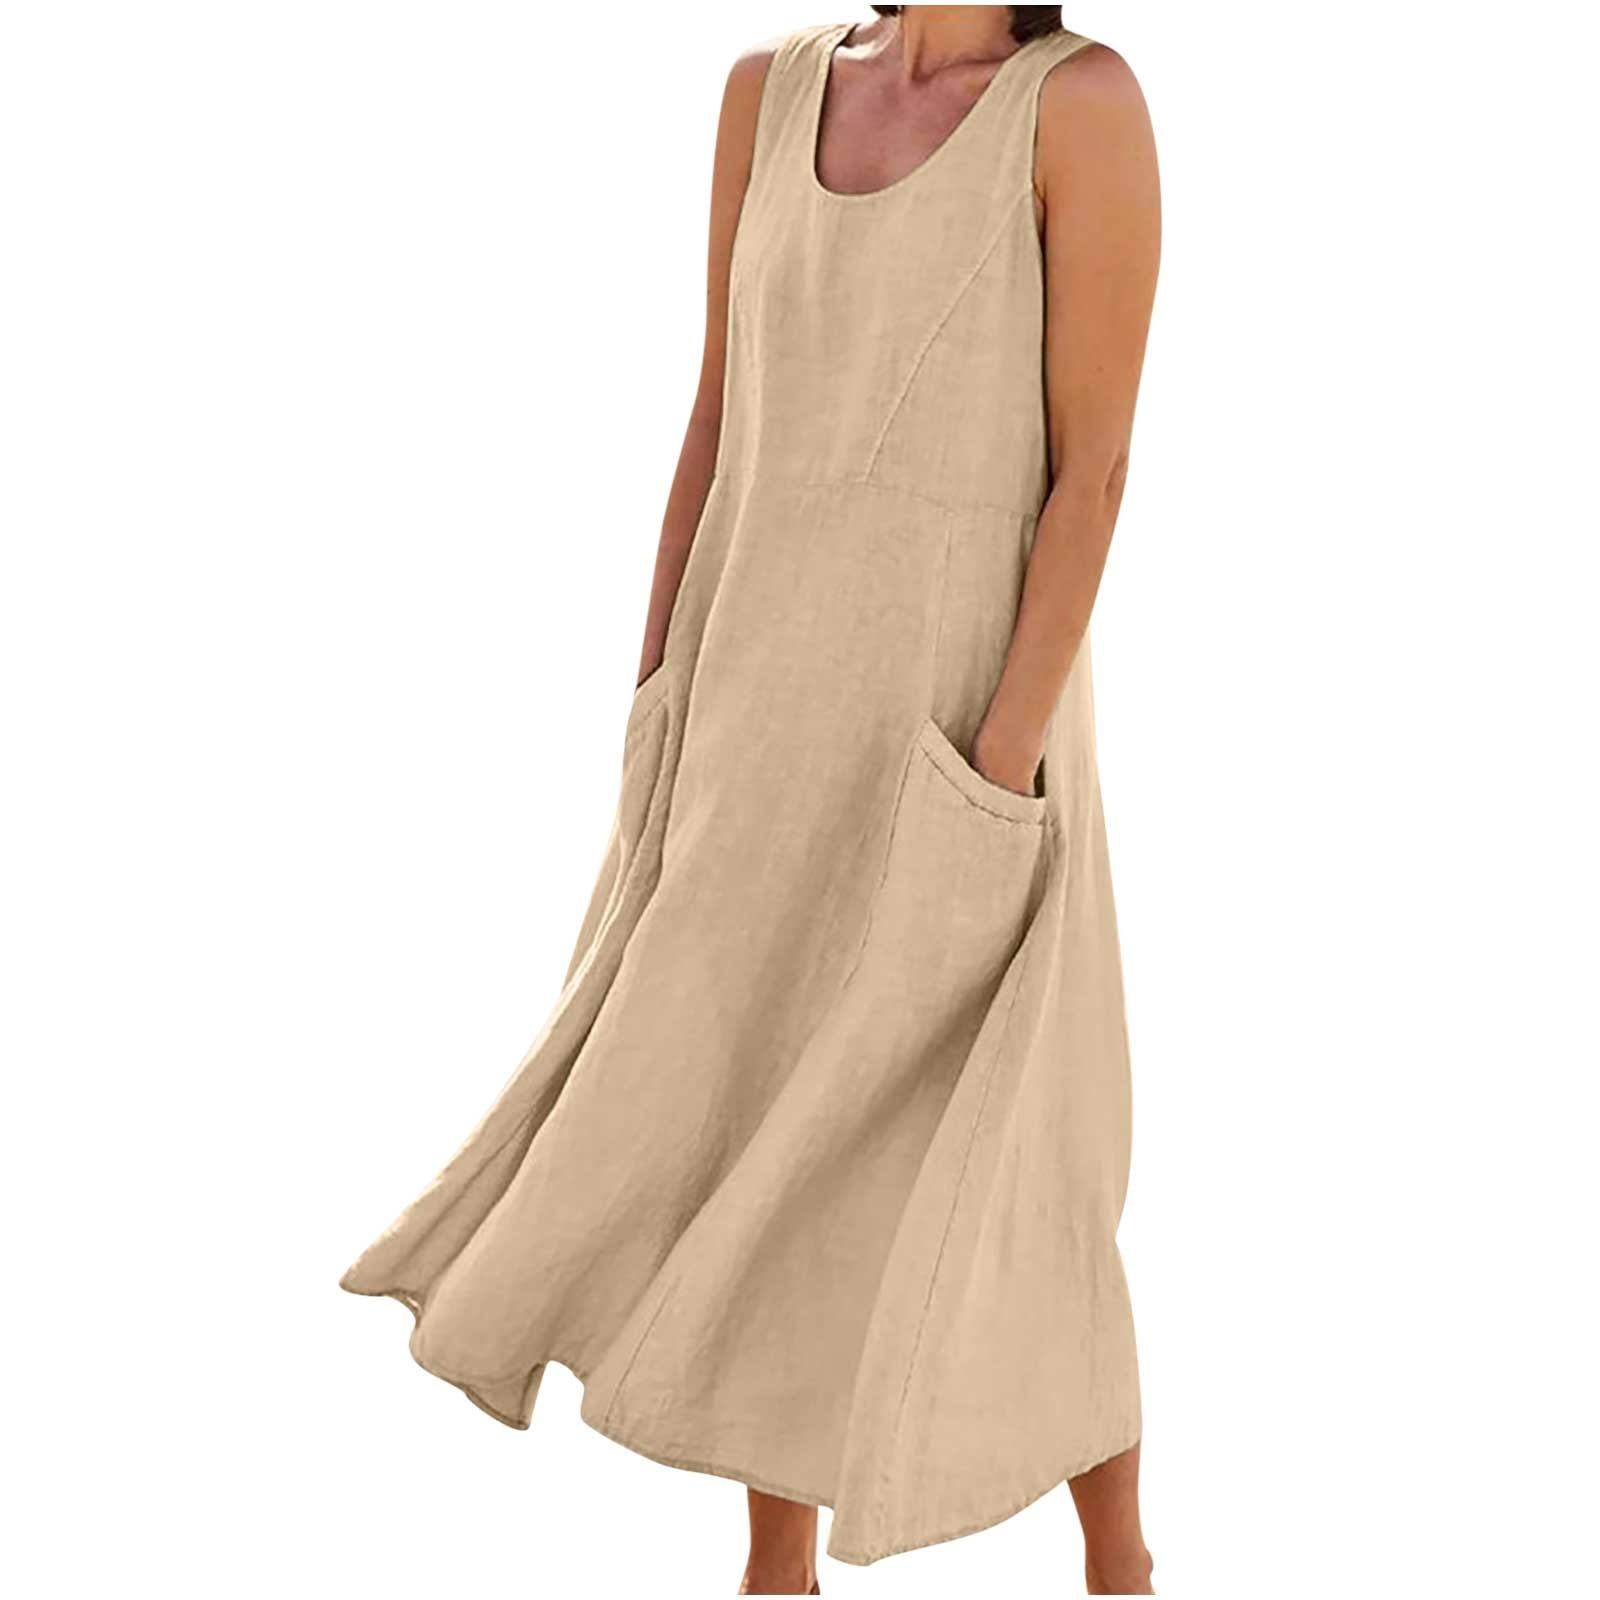 FAFWYP Summer Dresses for Women, Casual Maxi Sundresses Solid